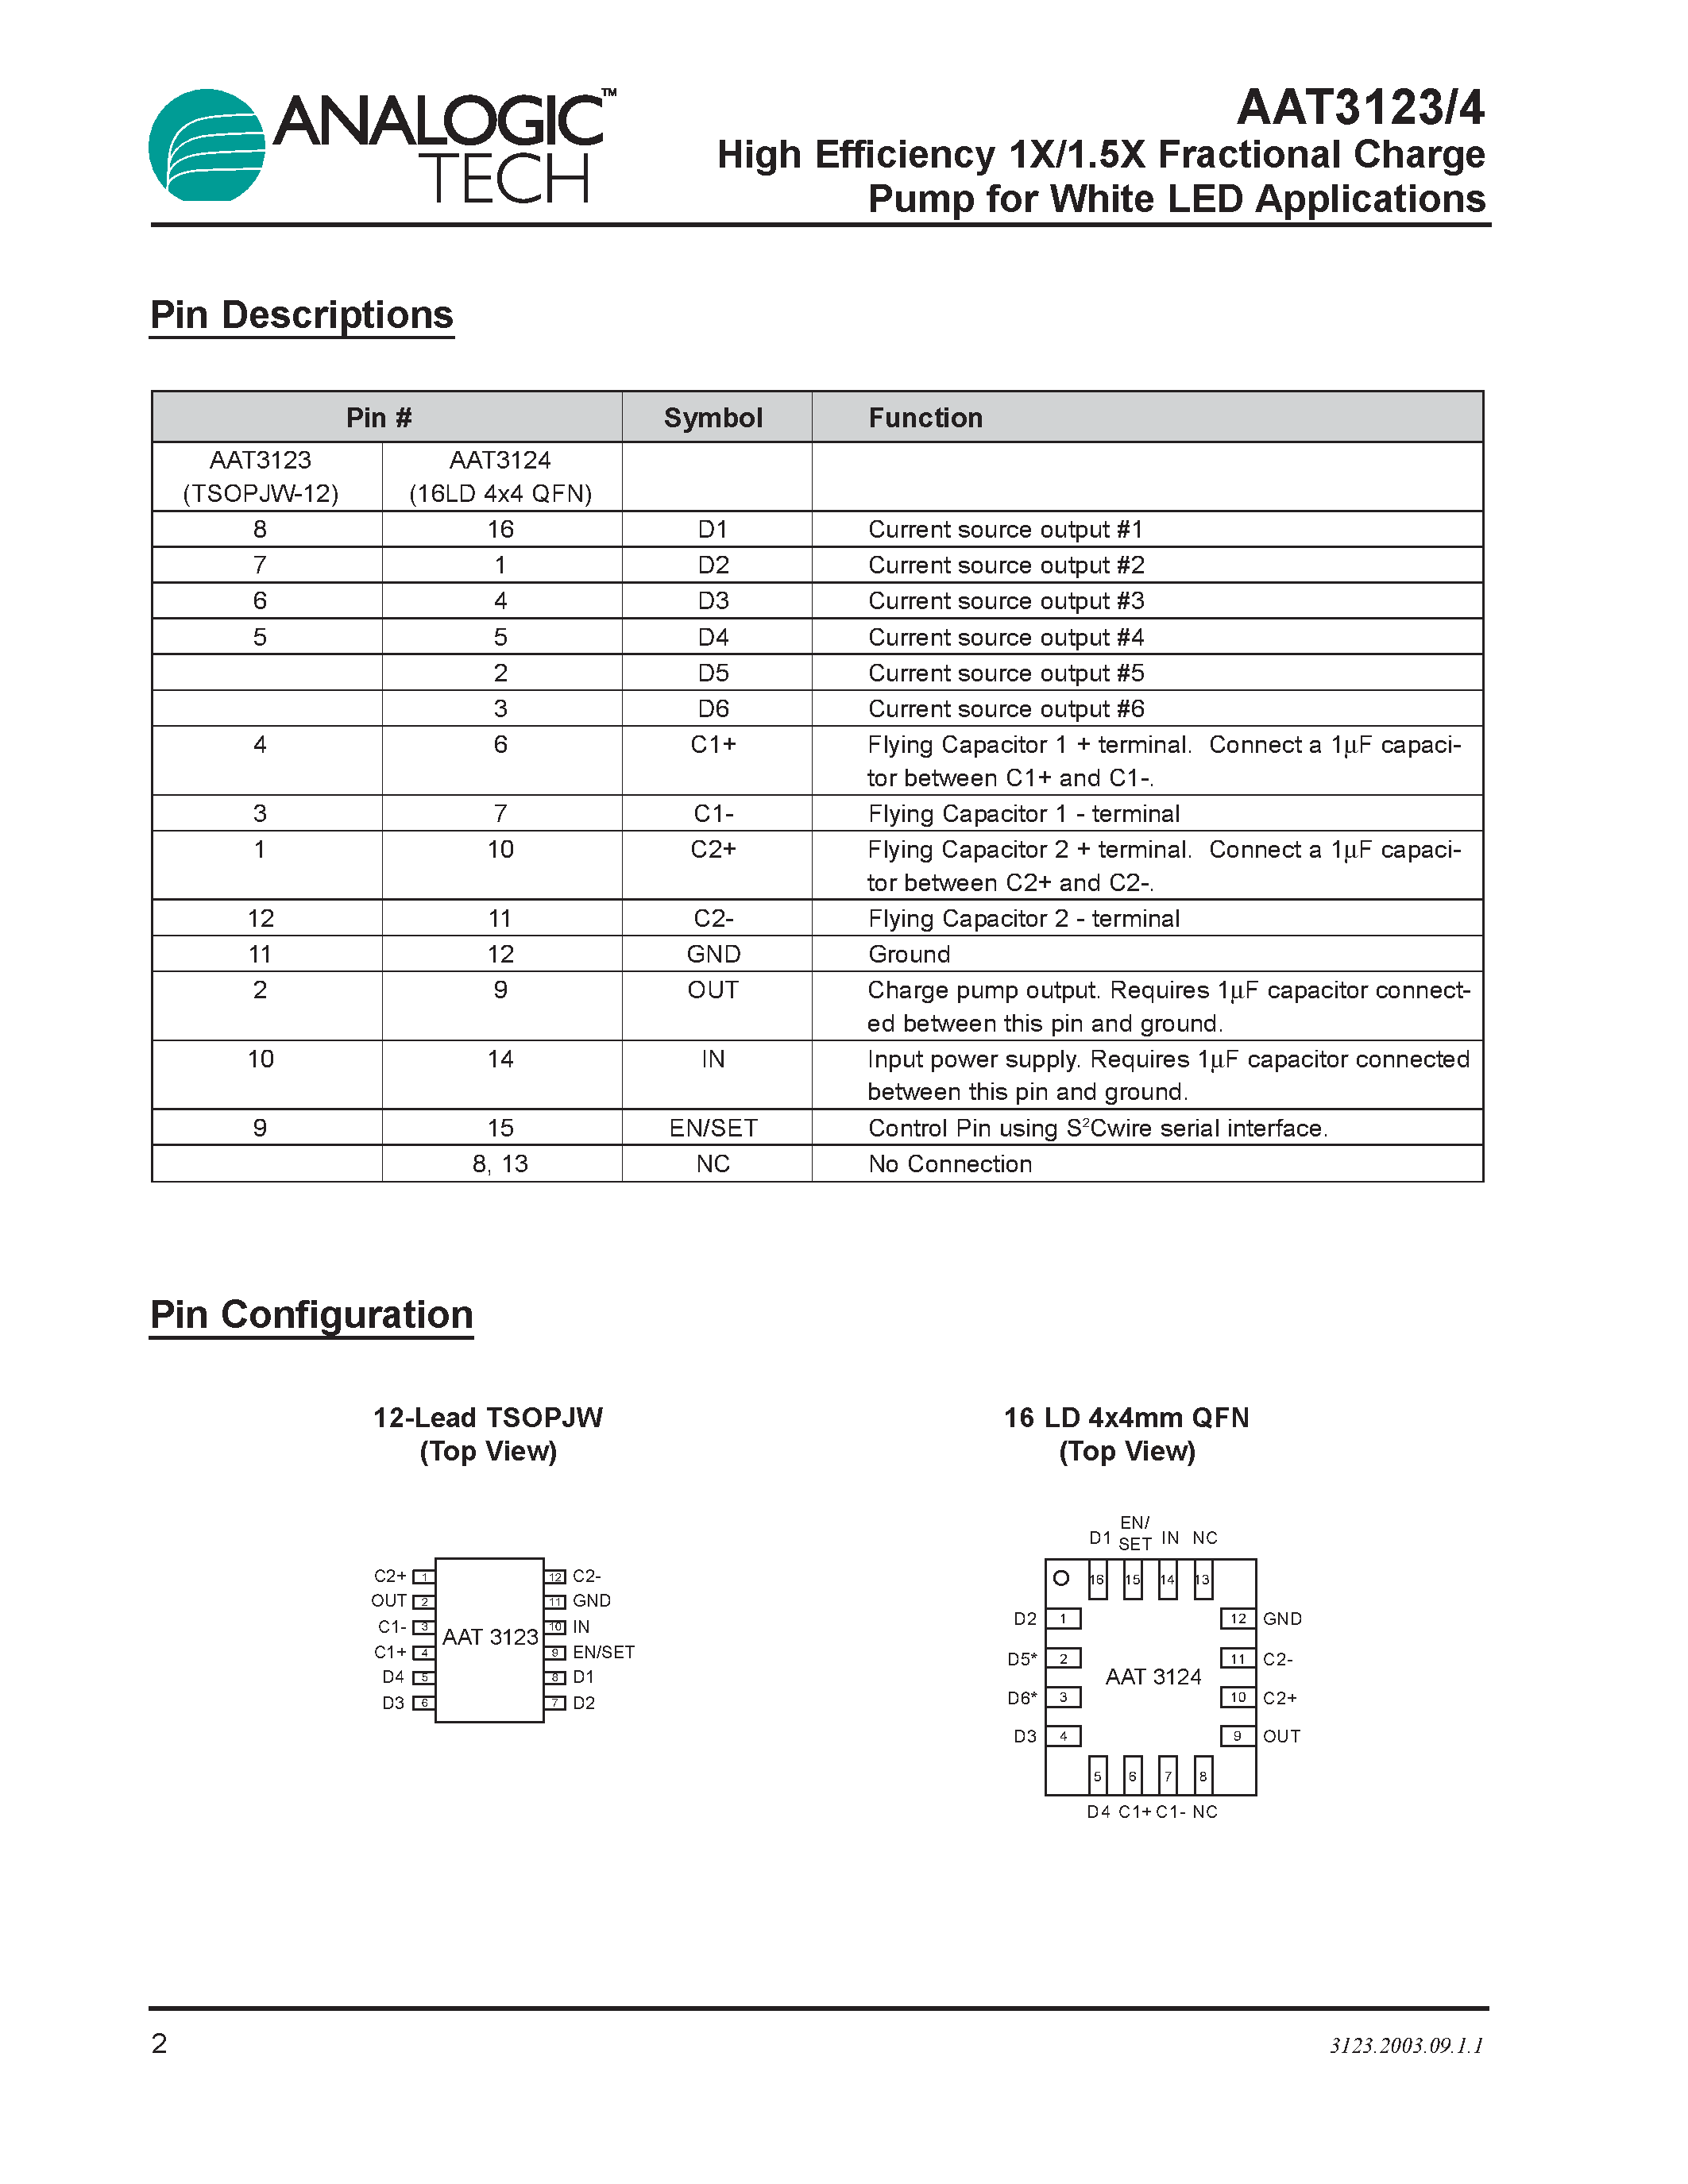 Datasheet AAT3123 - High Efficiency 1X/1.5X Fractional Charge Pump for White LED Applications page 2